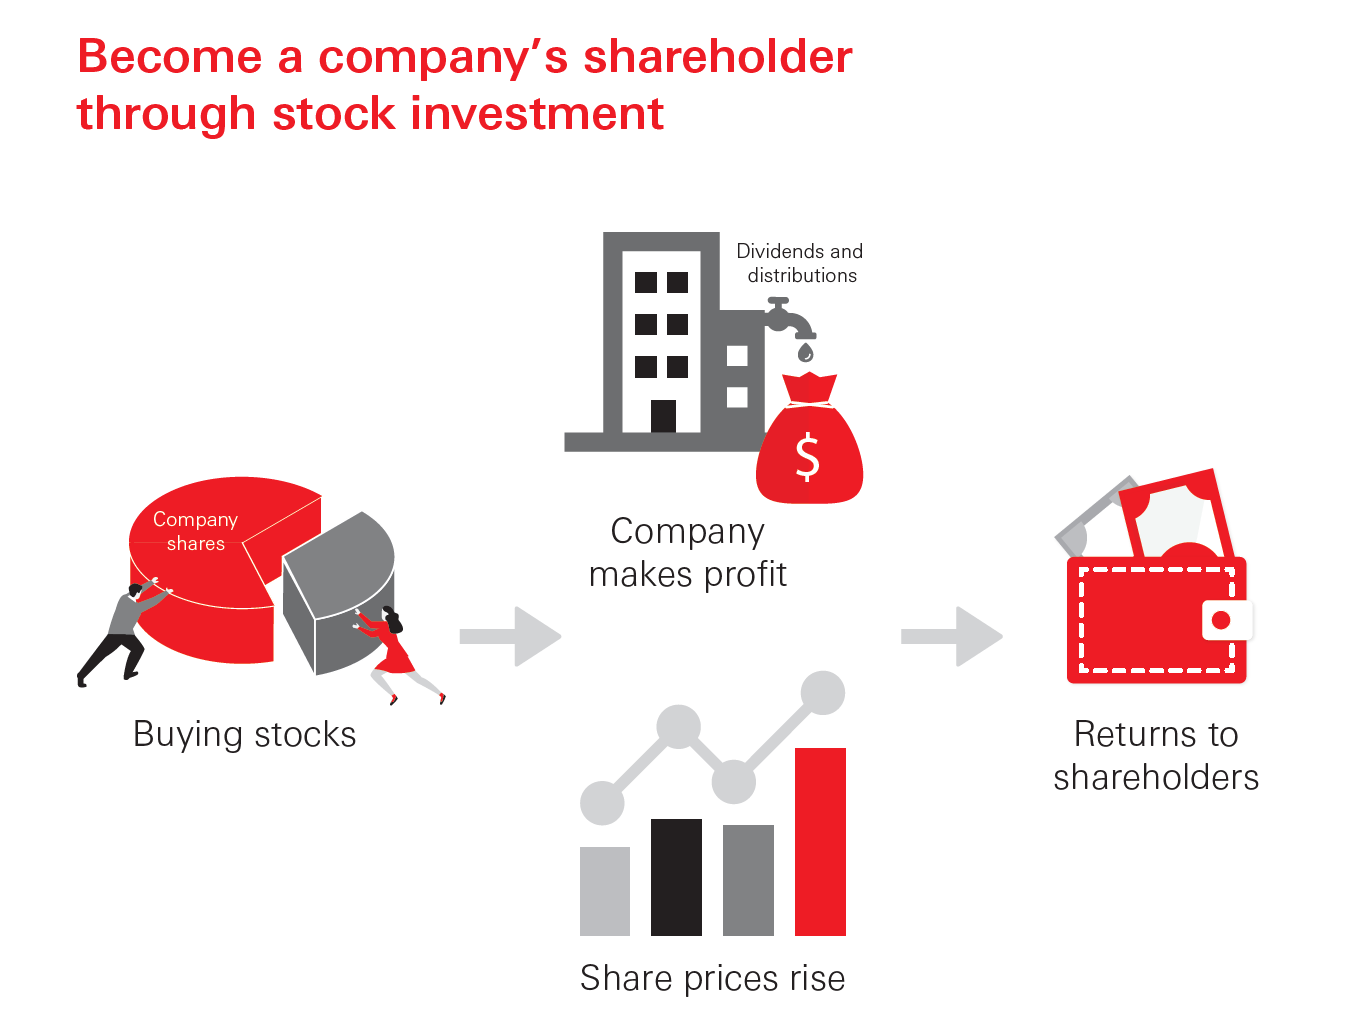 Become a company’s shareholder through stock investment. If that company makes money, its investors may receive both the dividends it distributes and capital gains due to the rise in its share prices.
